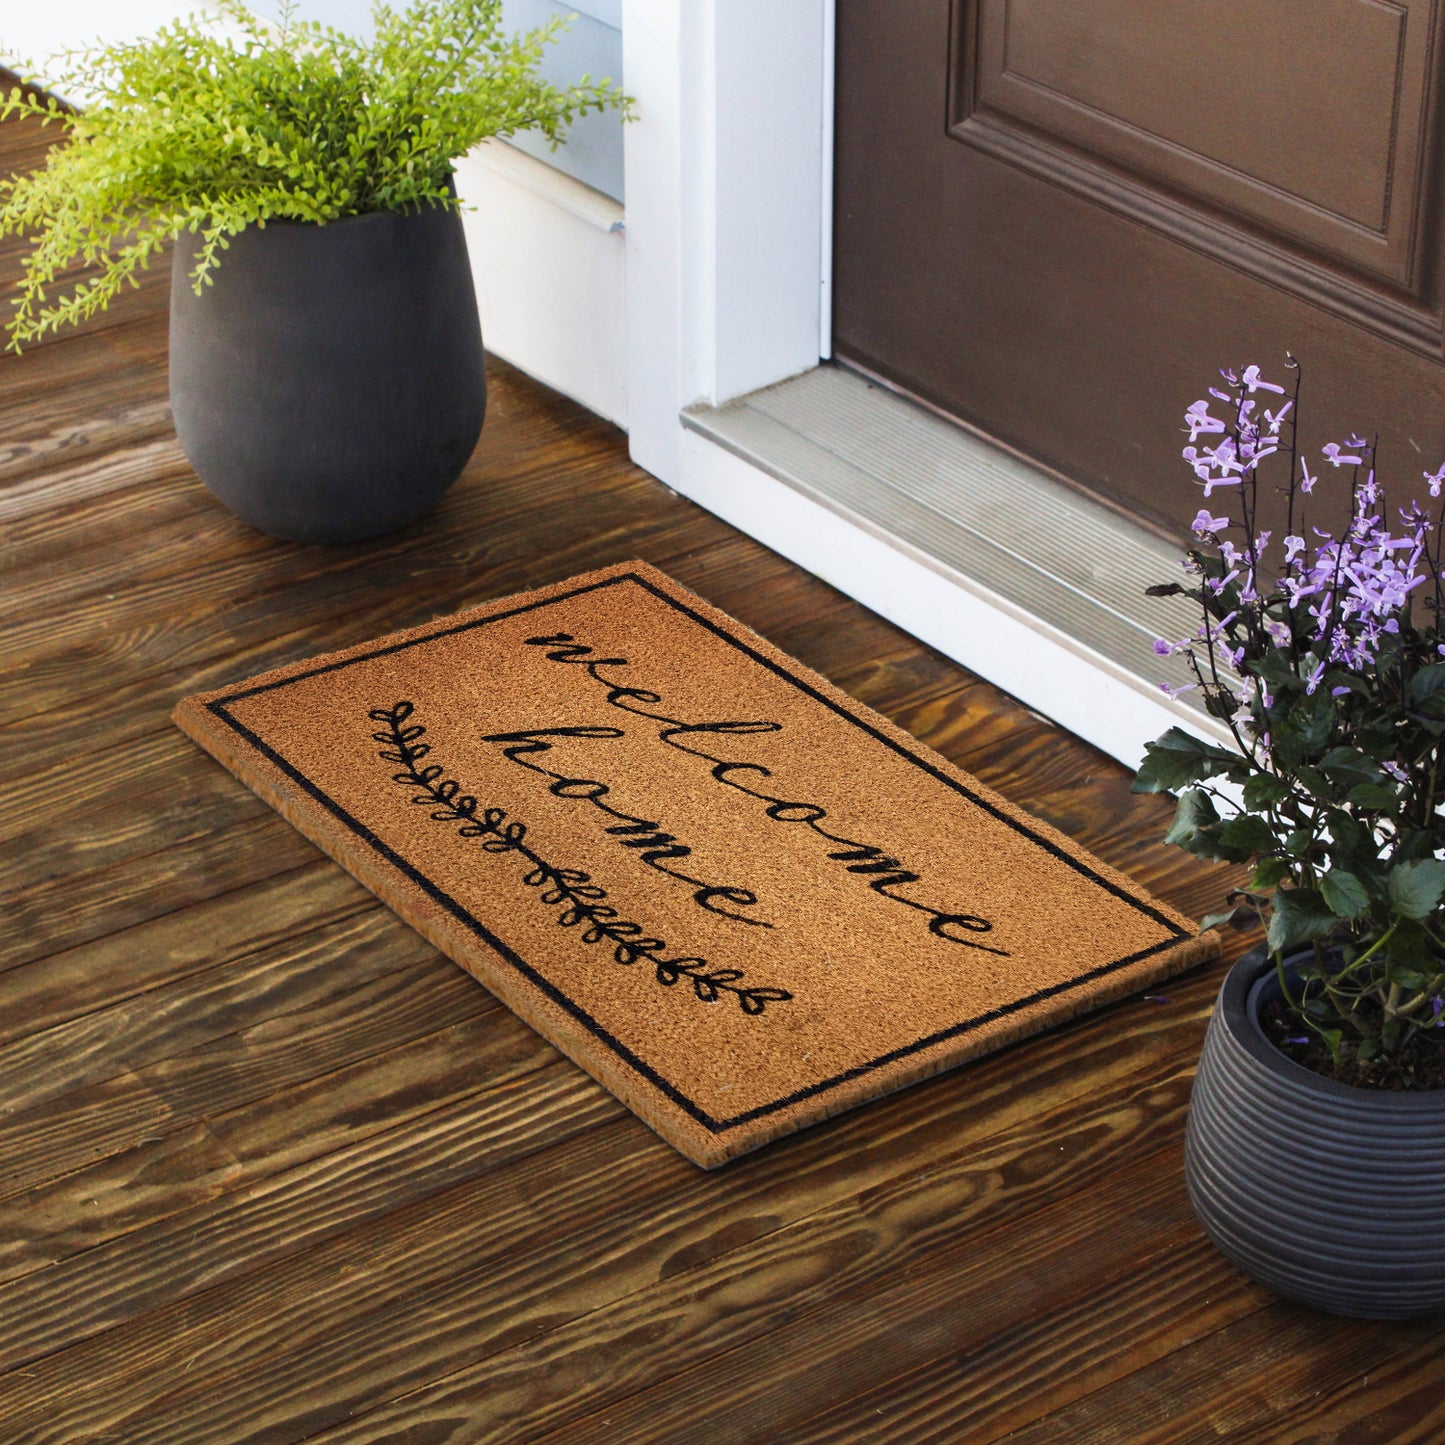 Avera Products "Welcome Home" Black Border Everyday Doormat